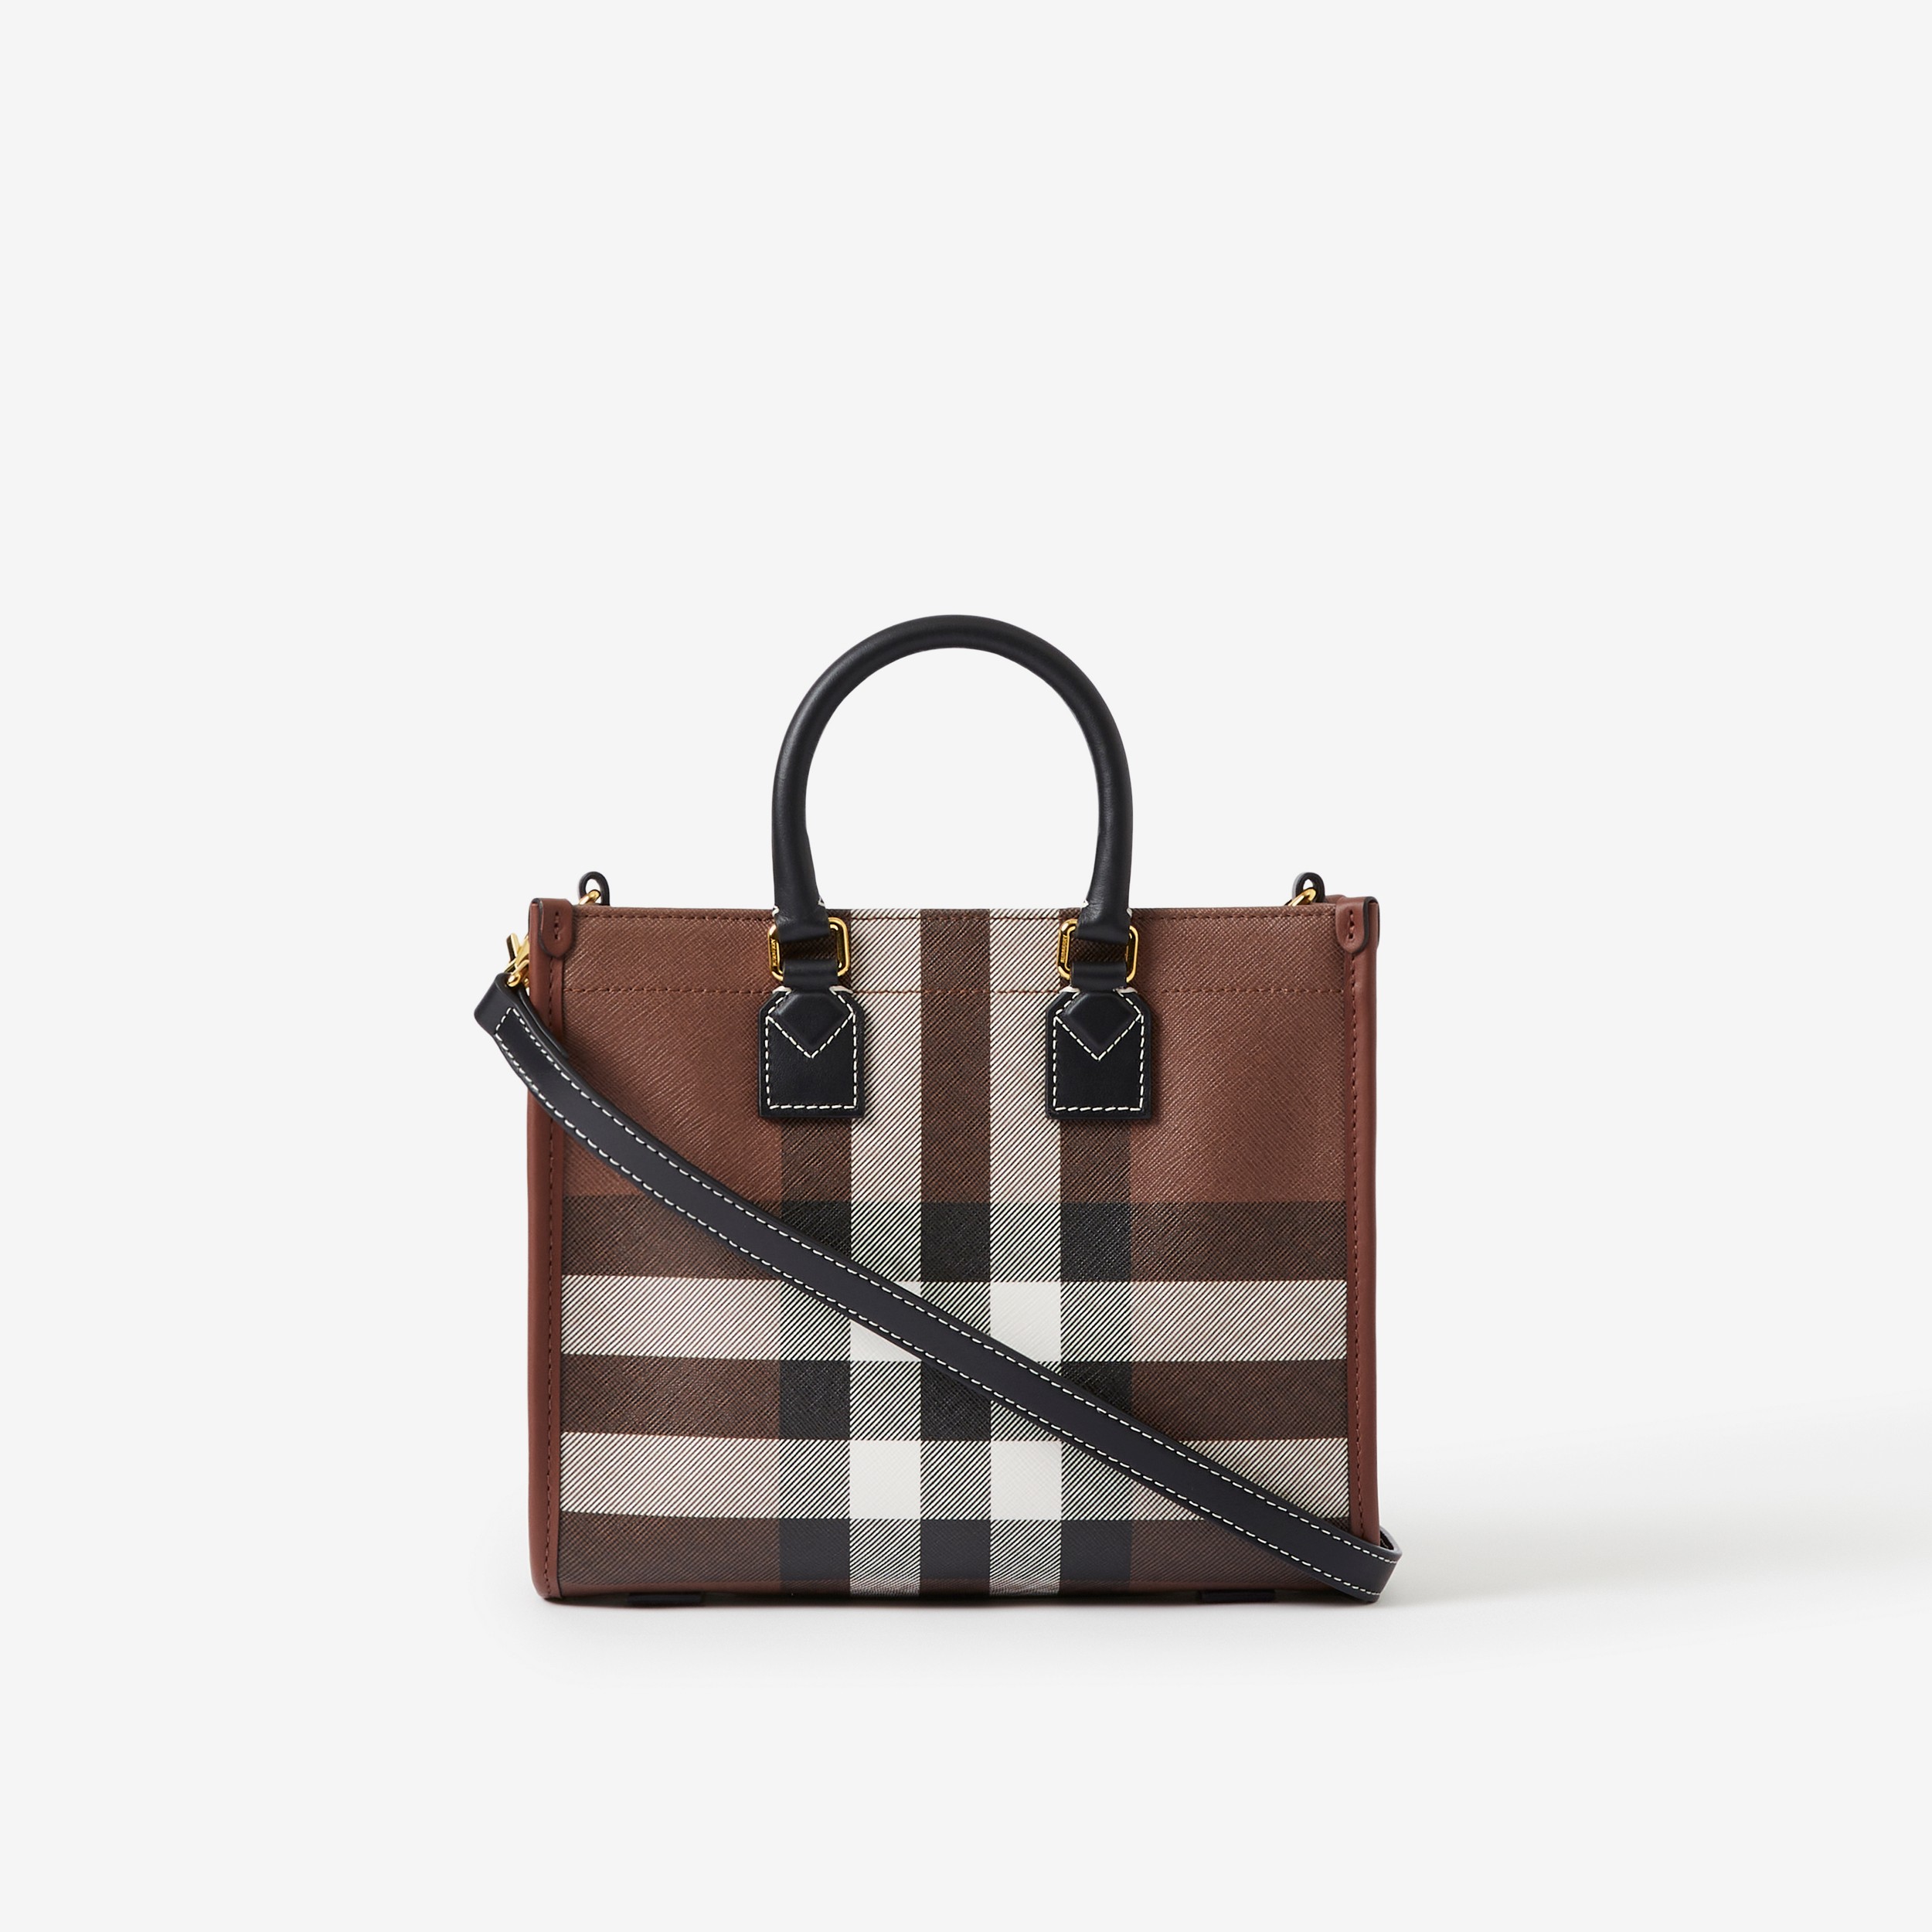 Minibolso tote Freya (Marrón Abedul Oscuro) - Mujer | Burberry® oficial - 3